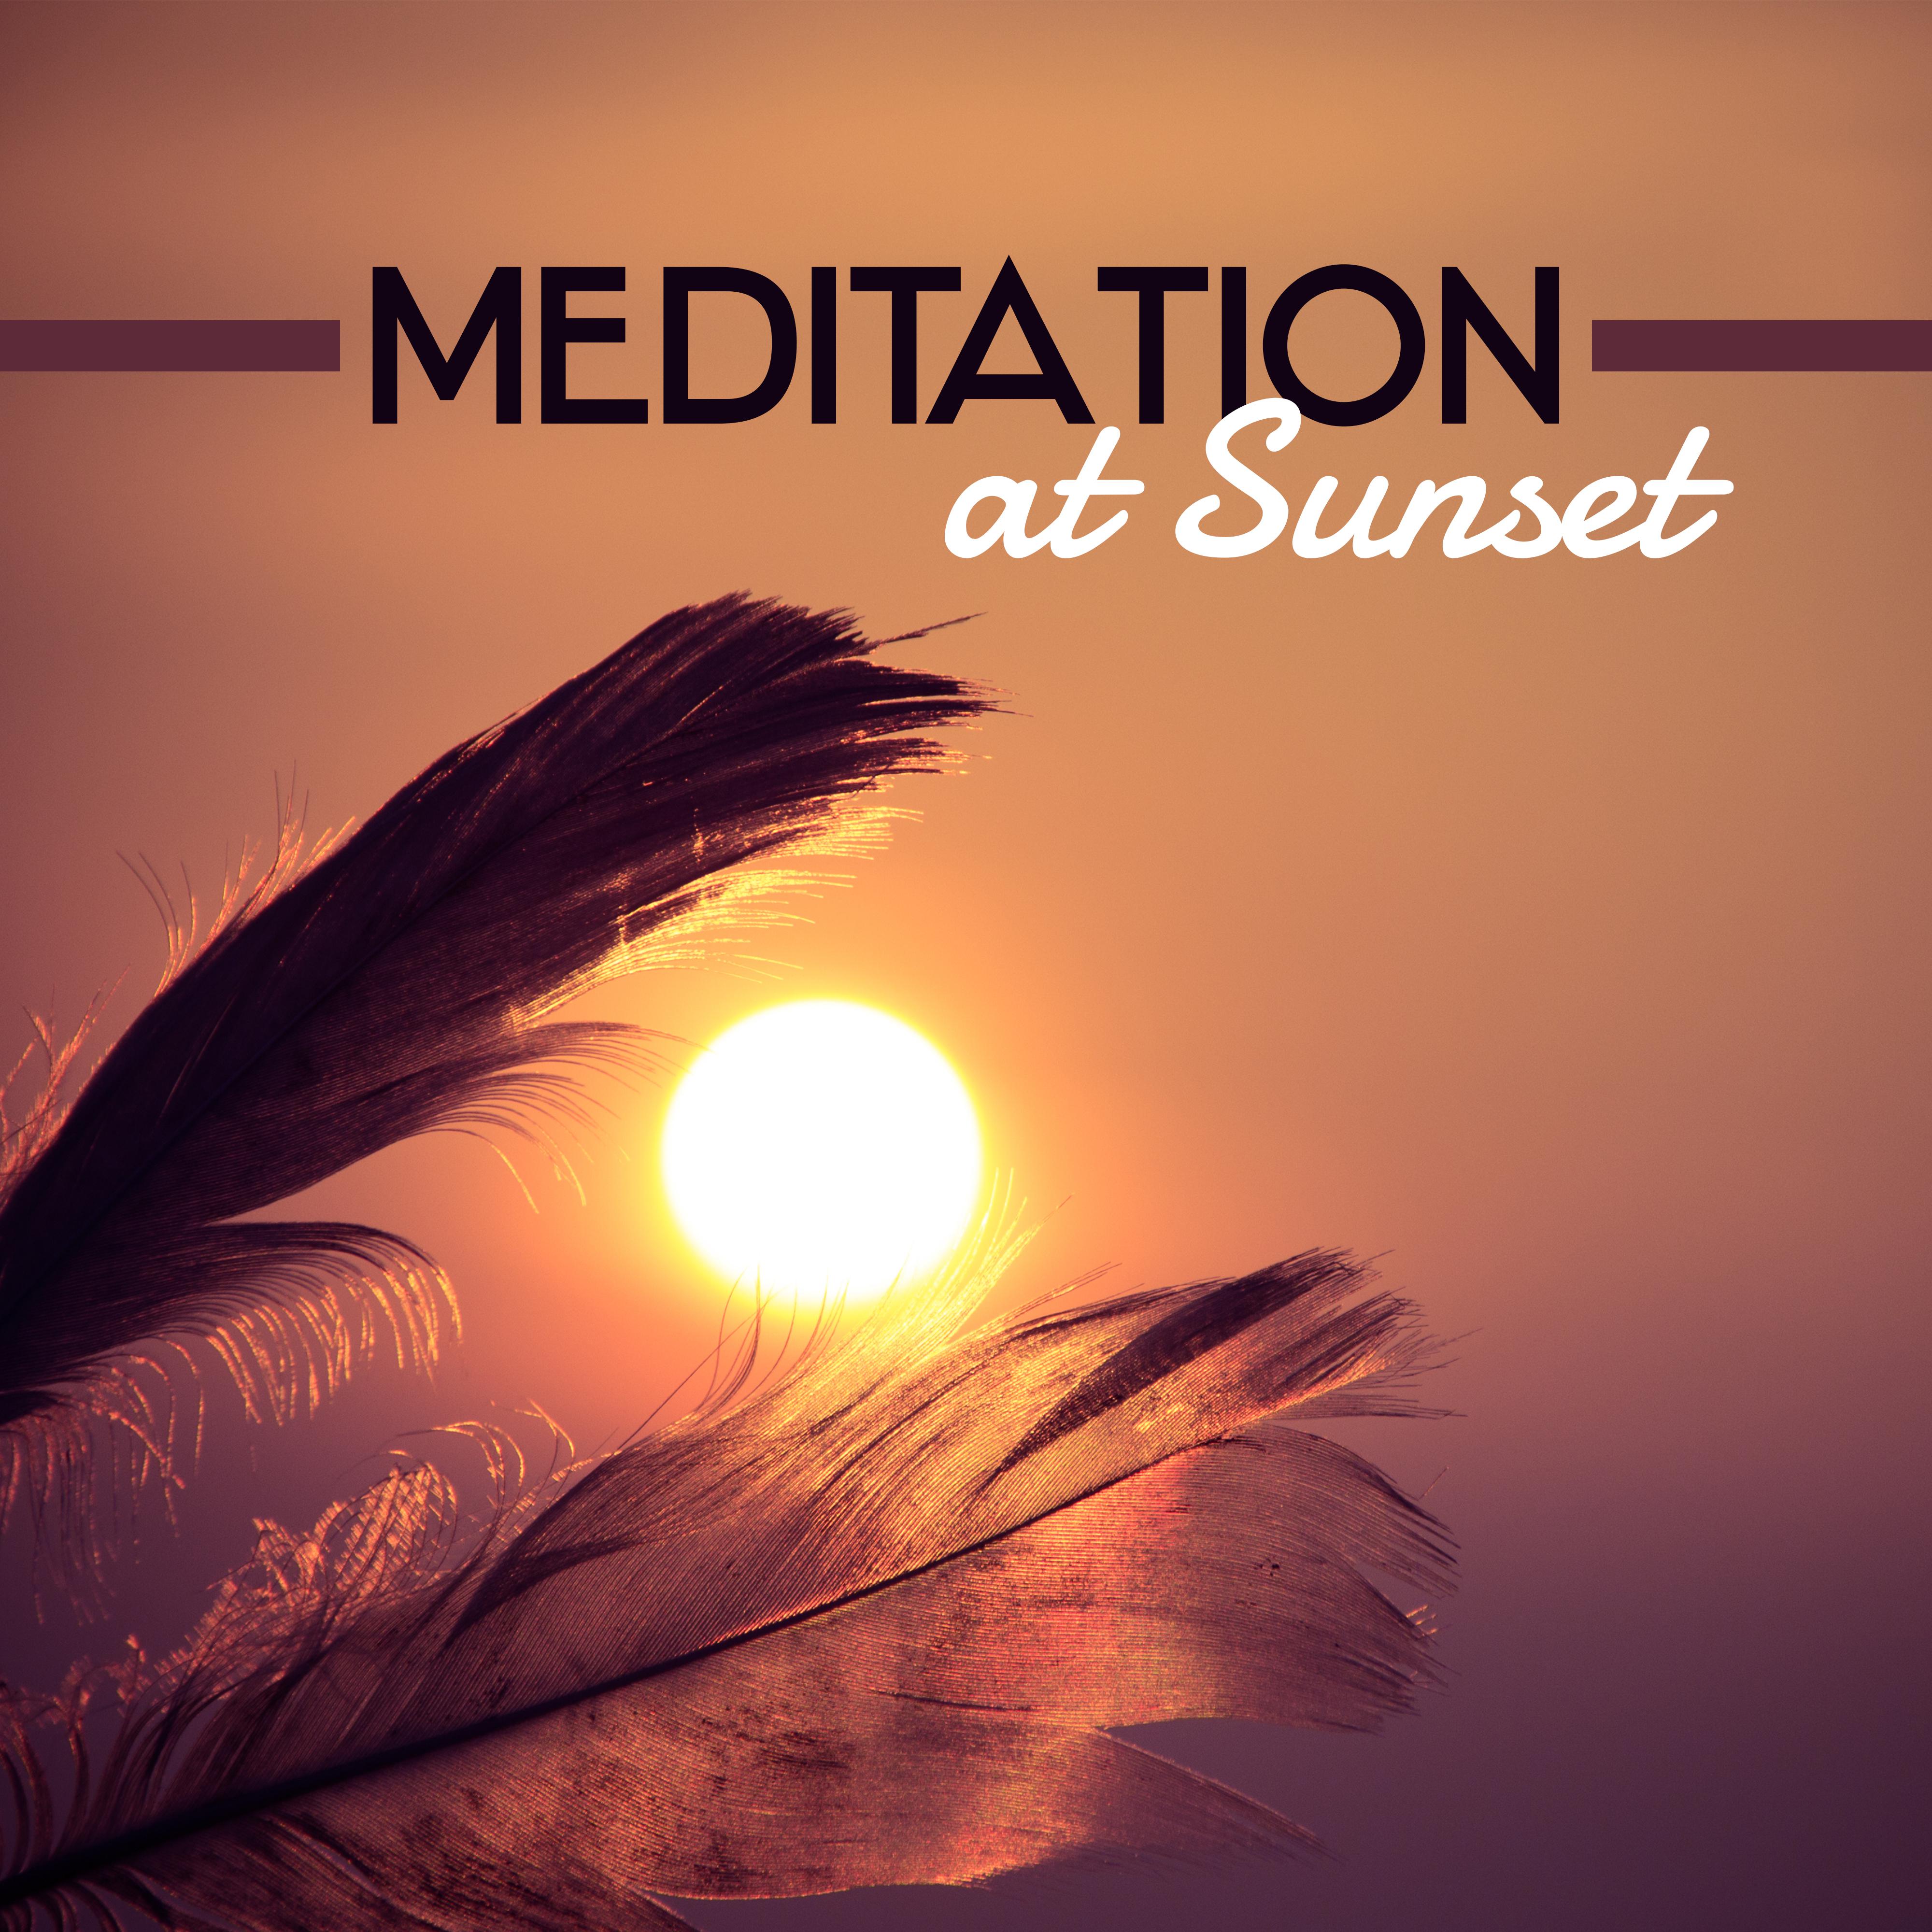 Meditation at Sunset – Training Yoga, Focus, Better Concentration, Meditation Music, Zen, New Age Sounds, Relief, Calmness